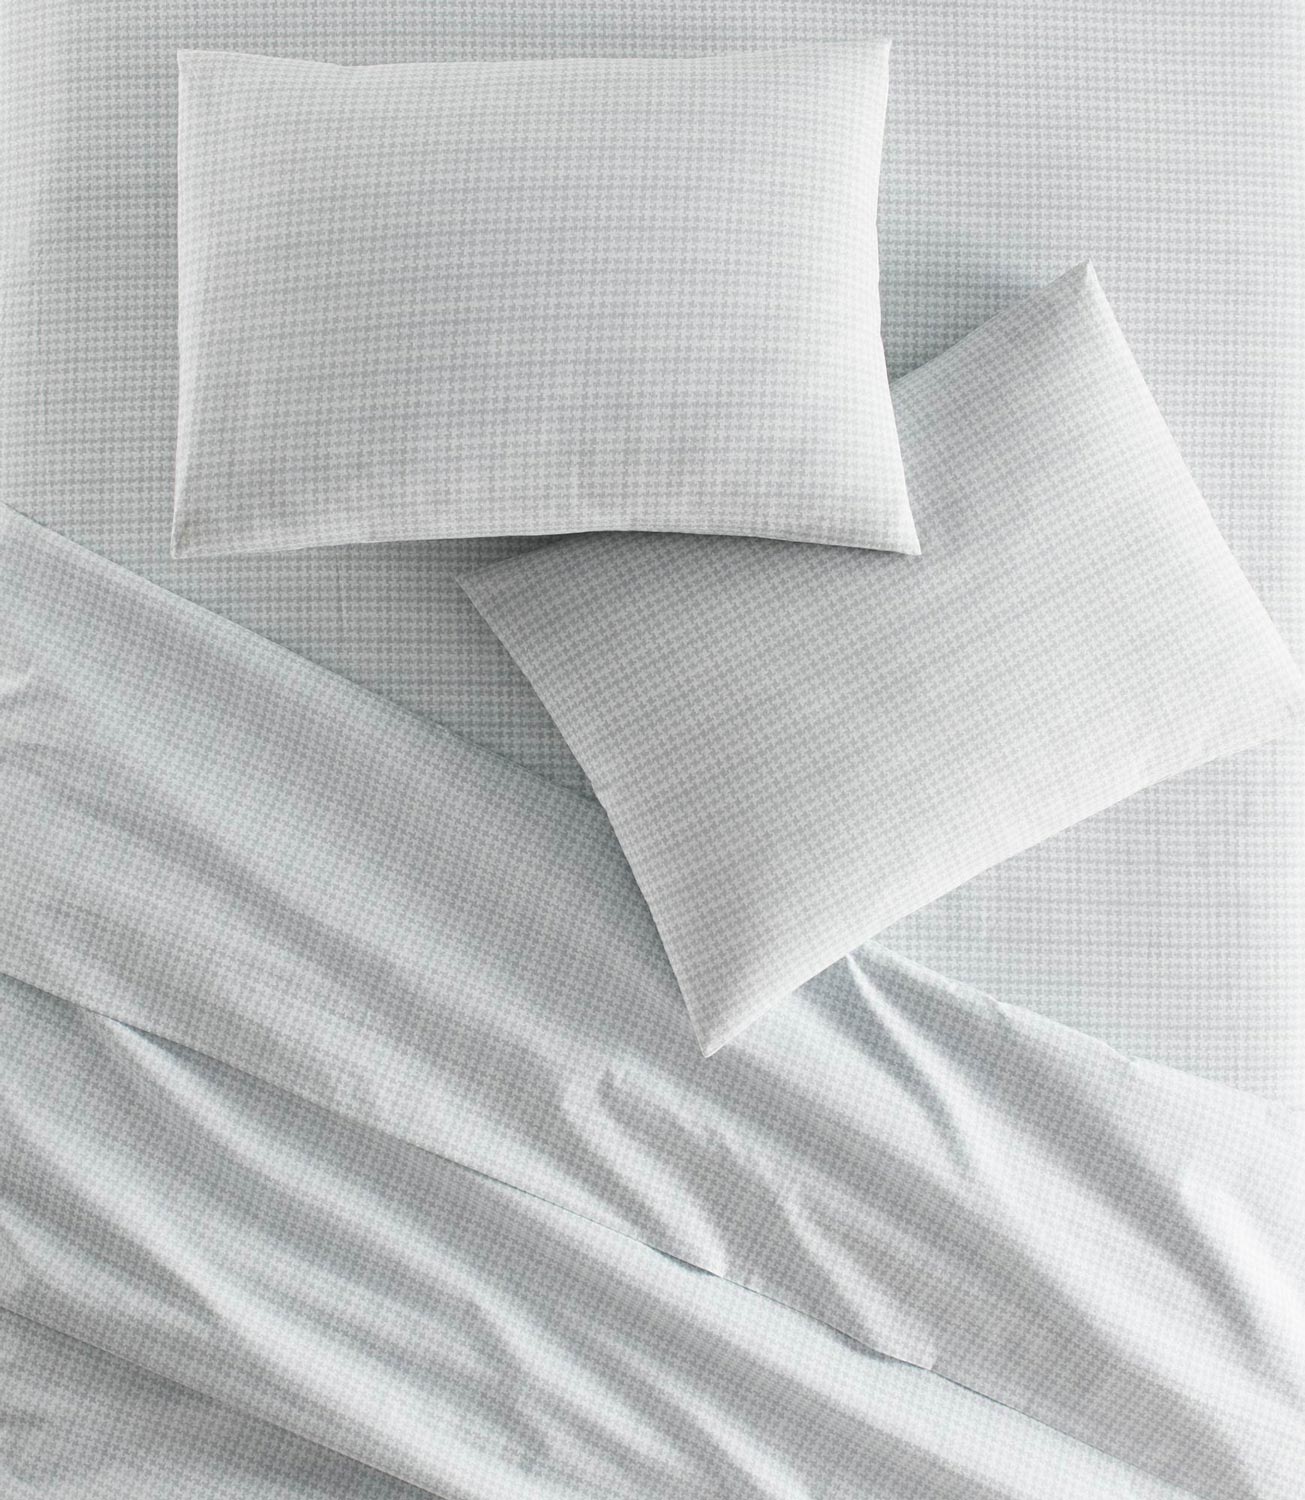 Houndstooth Percale Sheets on bed Light Blue